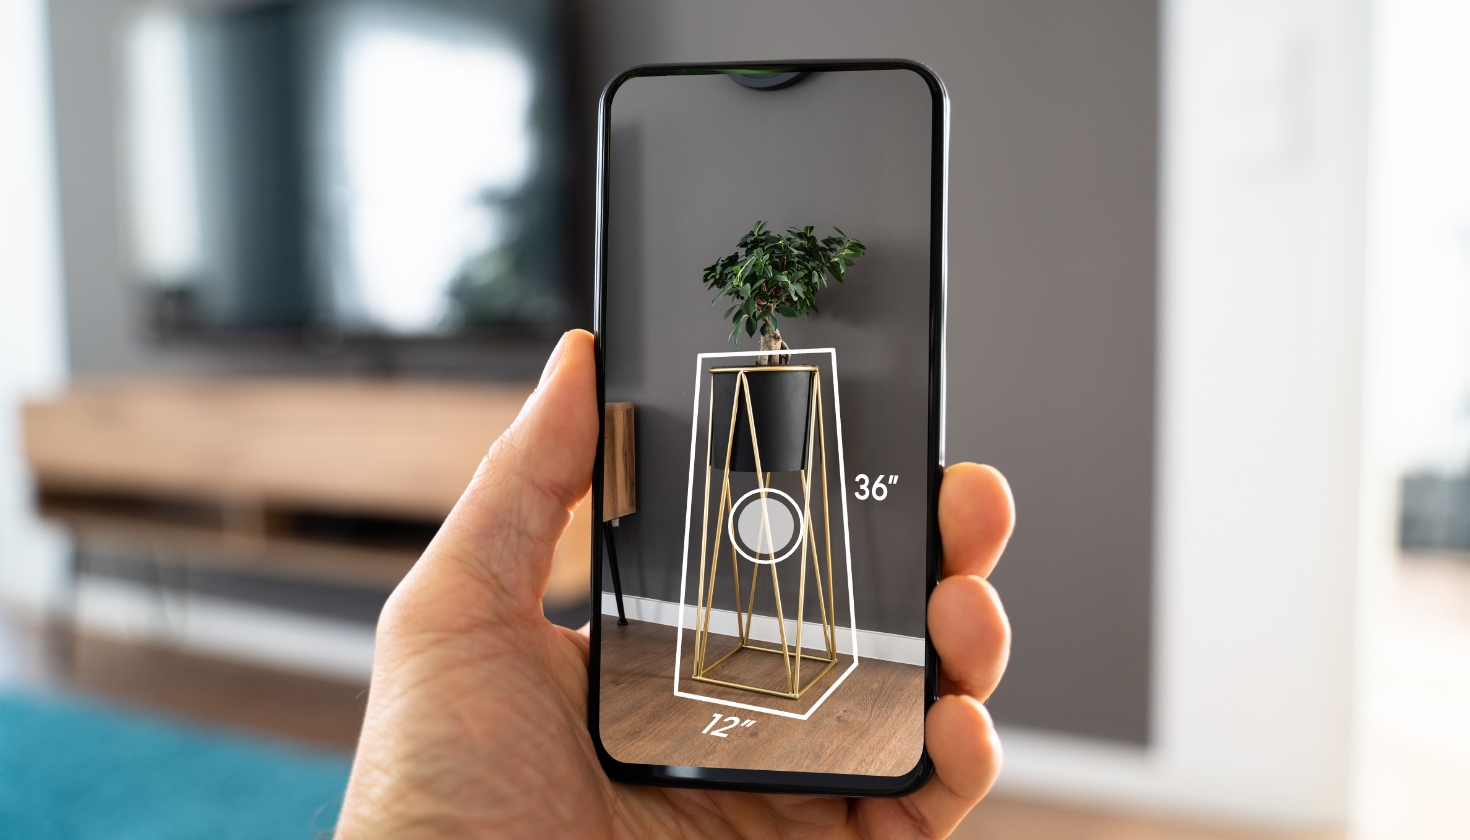 Using AR technology to preview furniture placement in a living room